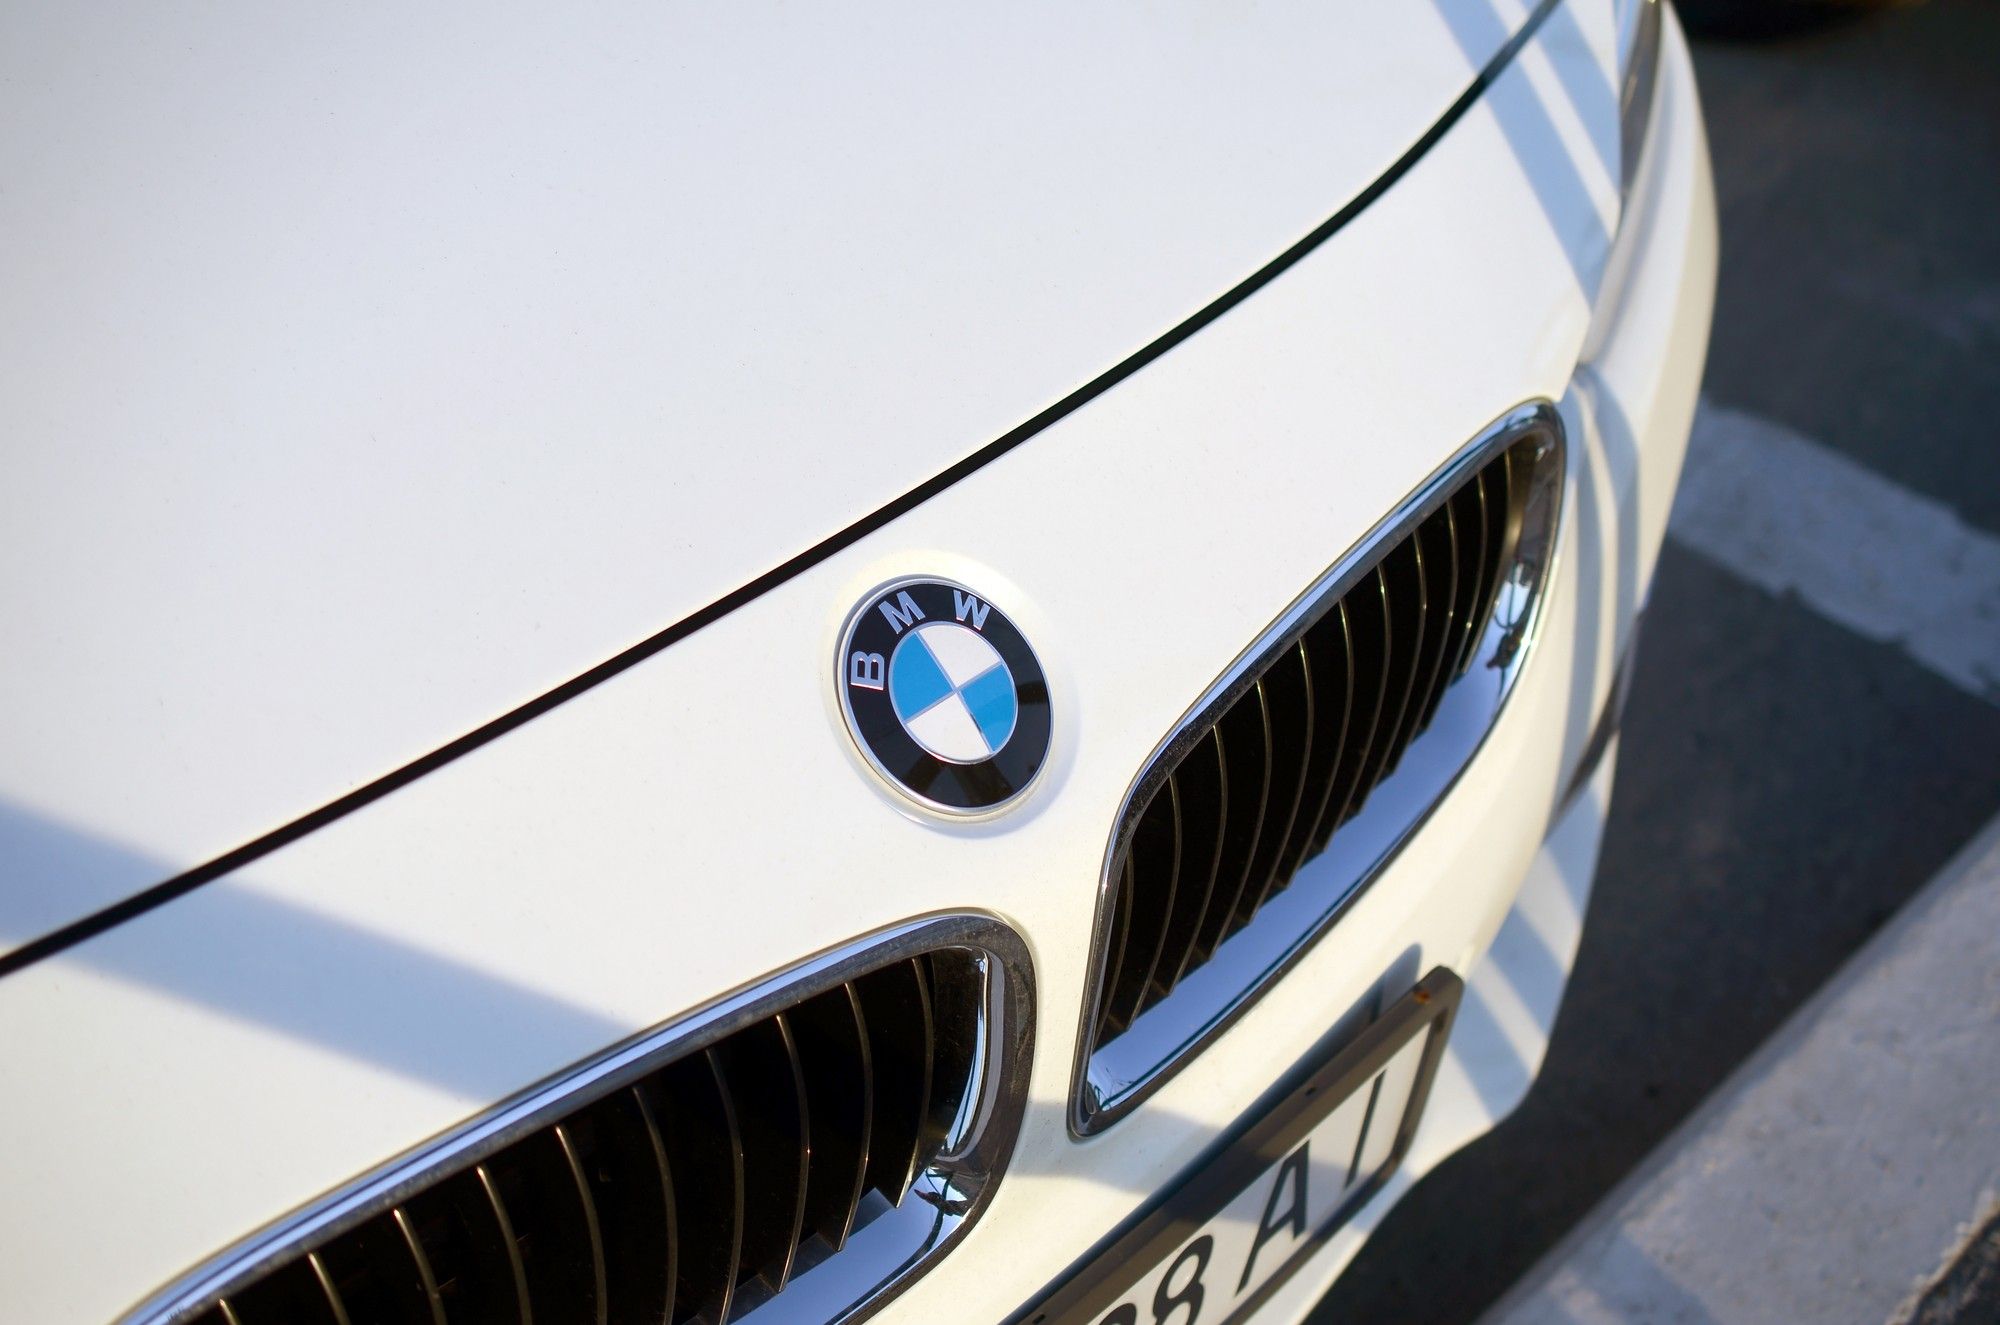 Recall Expansion by BMW North America: Should You File a Lemon Law Complaint?